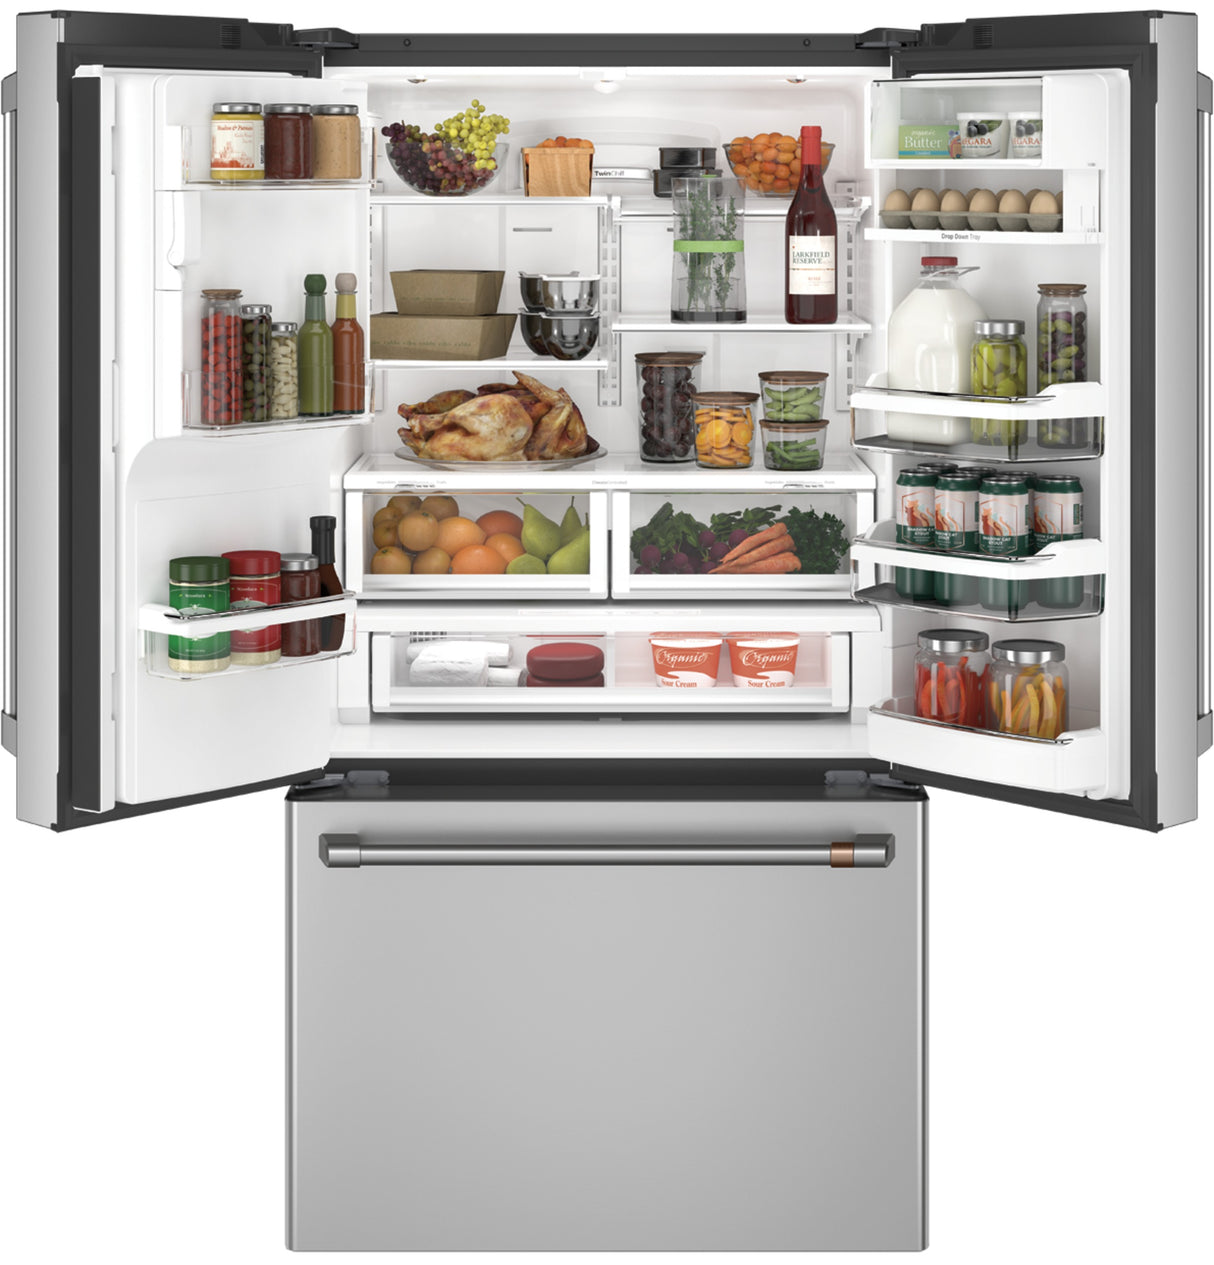 Caf(eback)(TM) ENERGY STAR(R) 22.1 Cu. Ft. Smart Counter-Depth French-Door Refrigerator with Hot Water Dispenser - (CYE22TP2MS1)